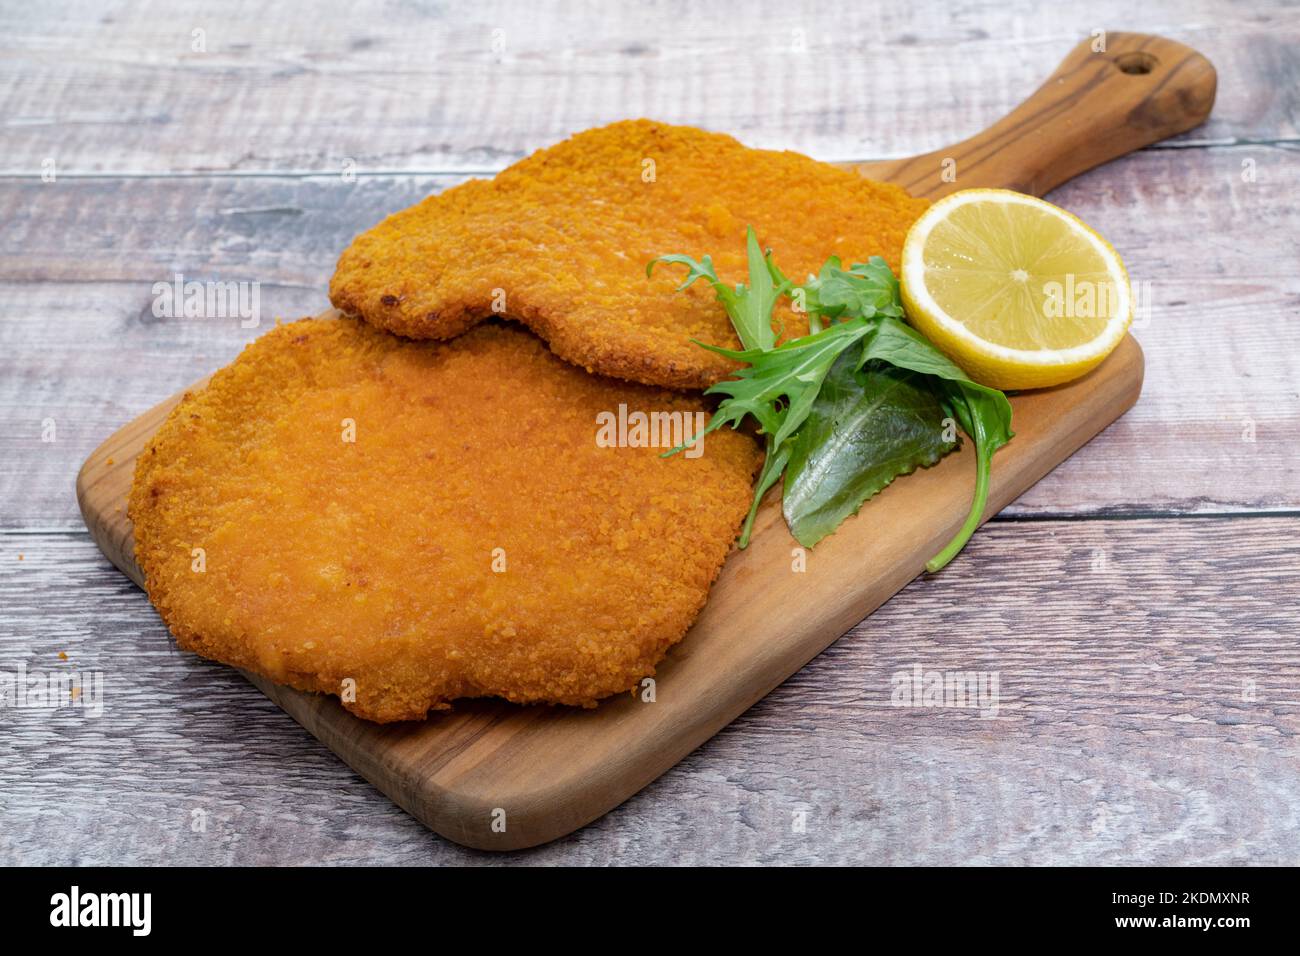 Two Wiener schnitzel placed on a serving board with lemon and garnish Stock Photo